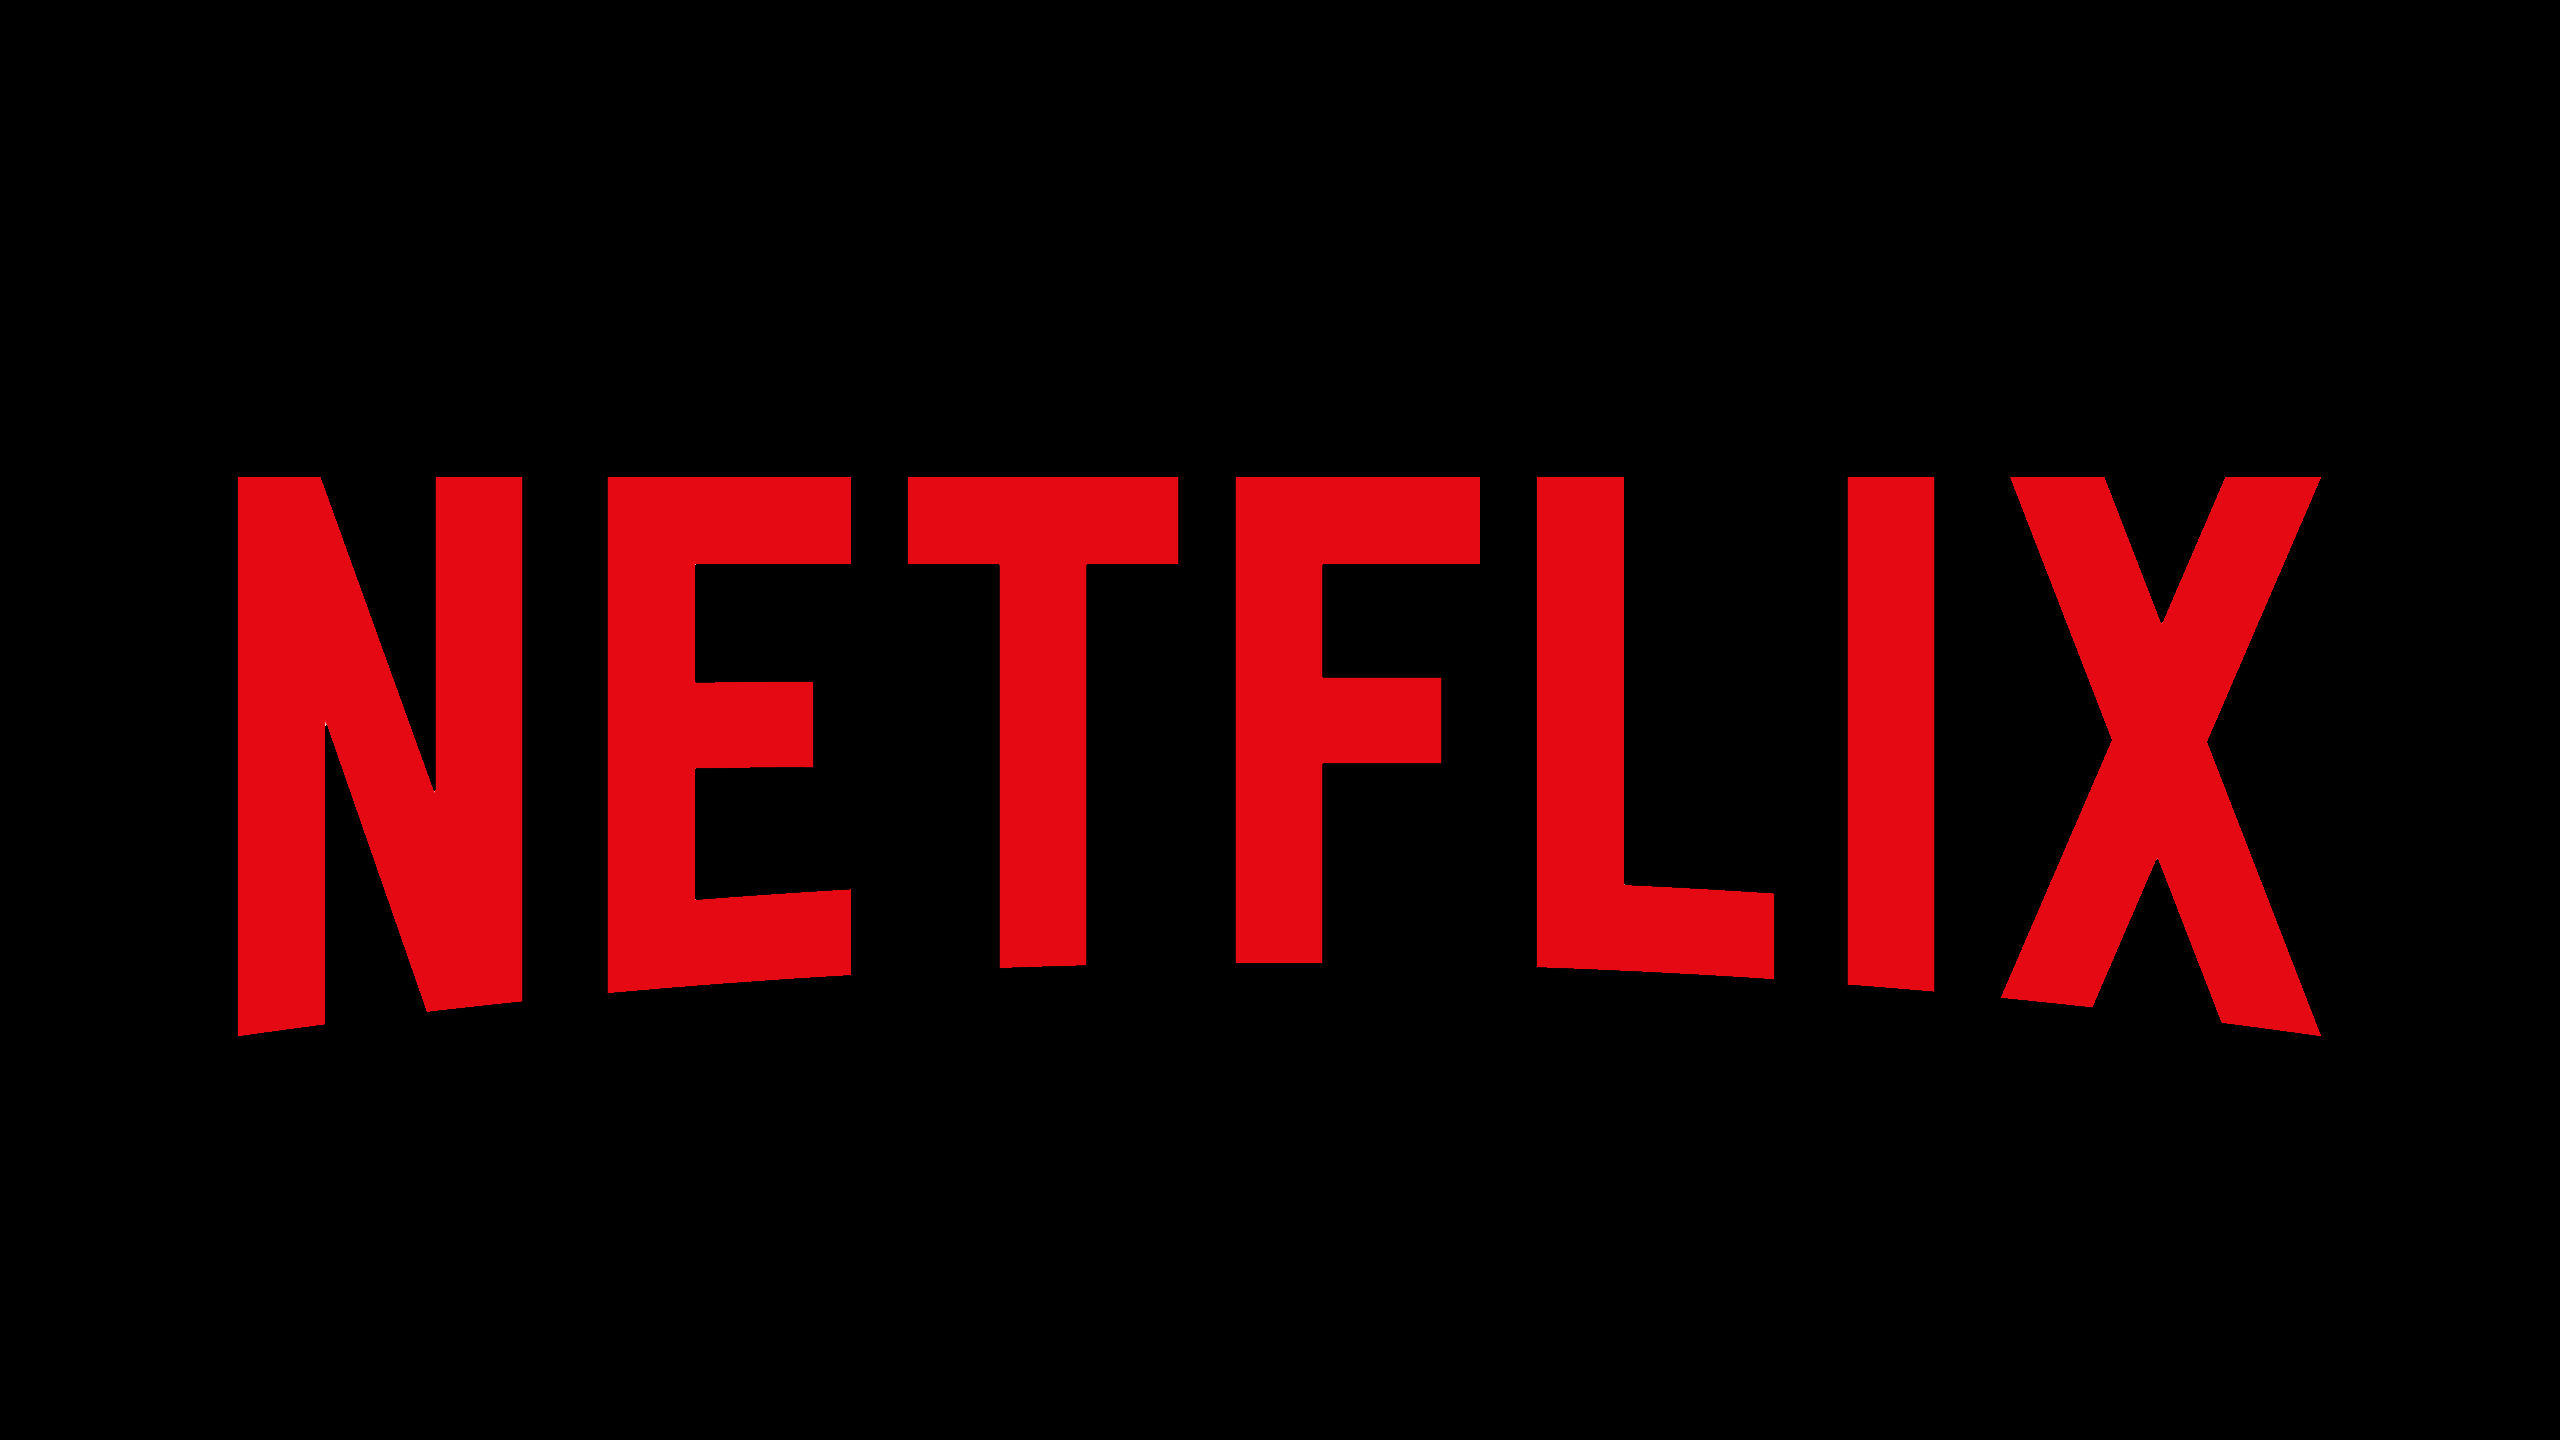 https://adgully.me/post/581/gulf-countries-warn-netflix-on-content